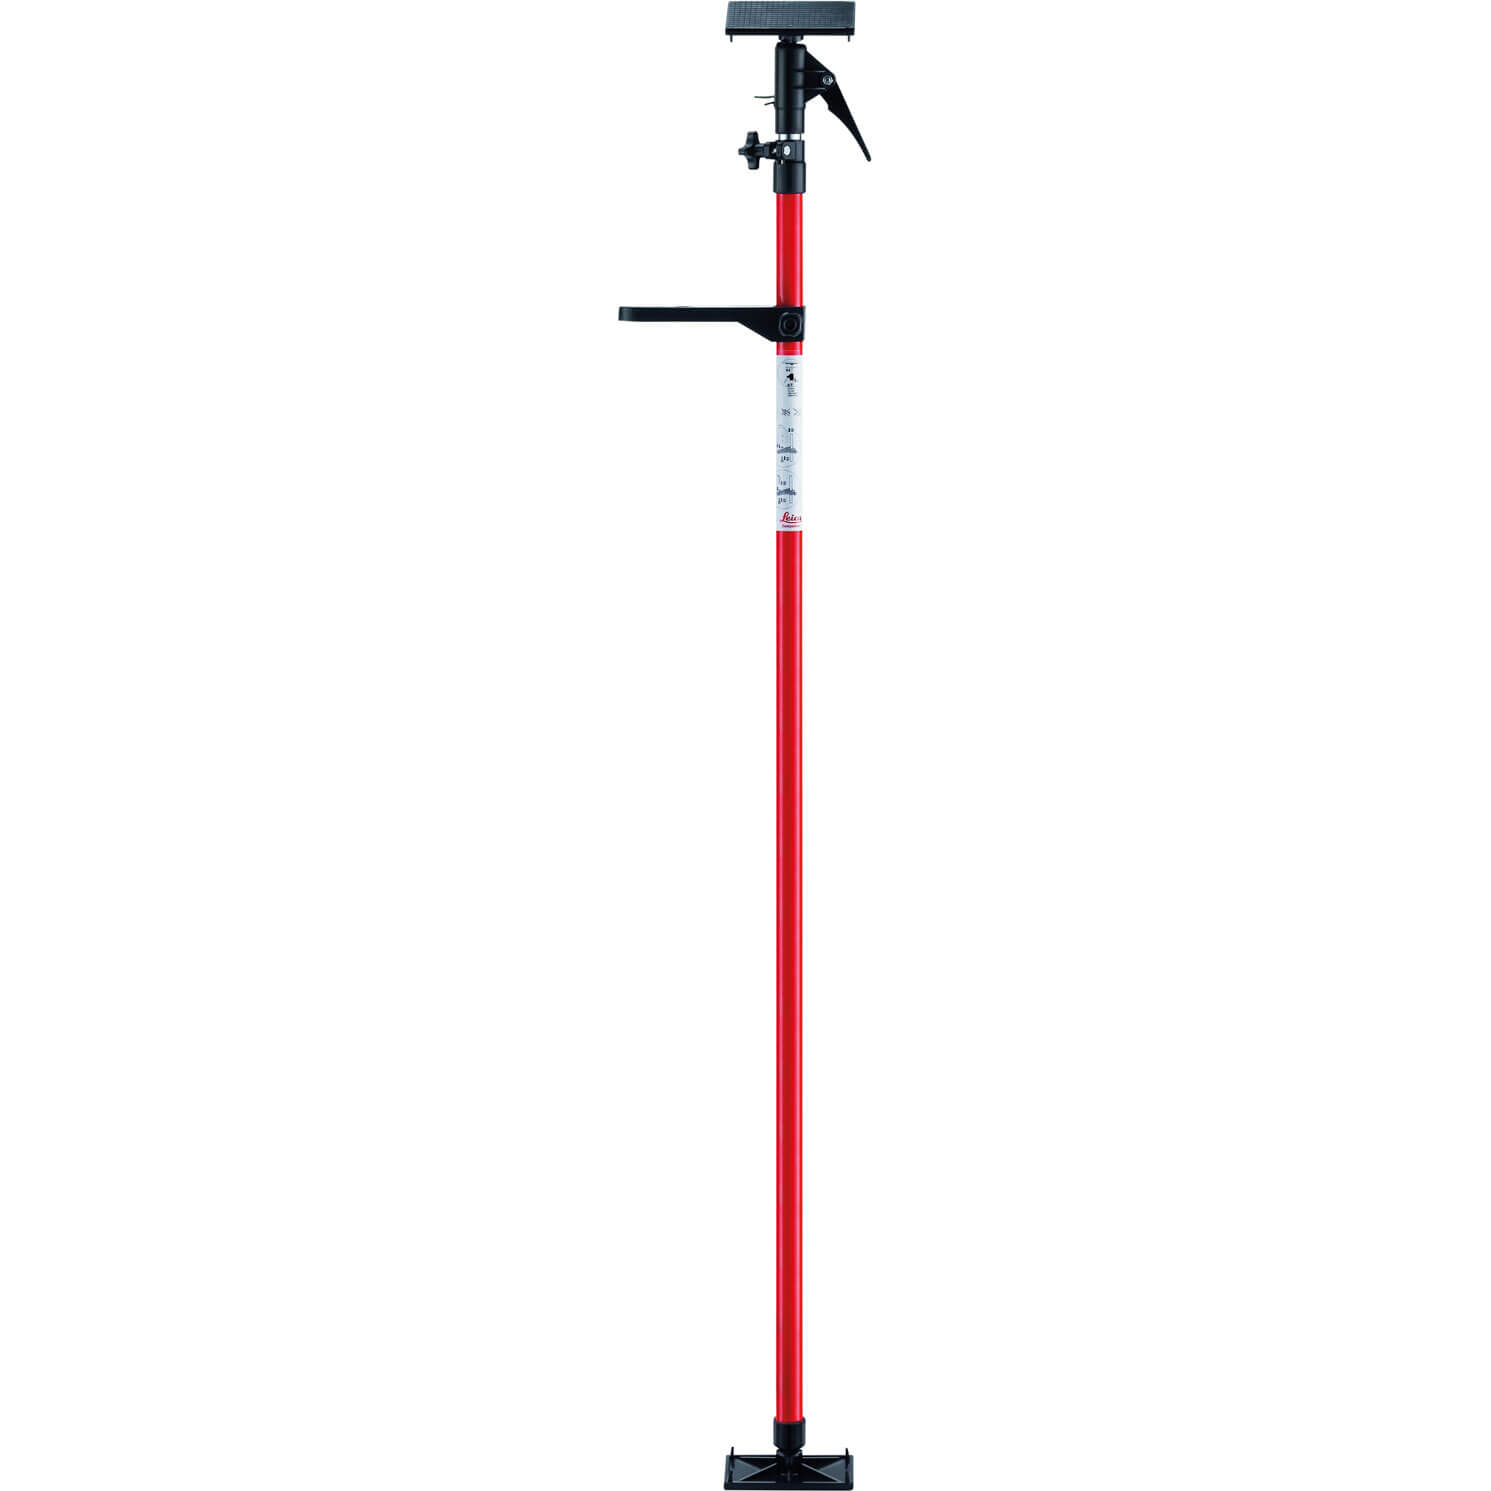 Photos - Other for Construction Leica Geosystems CLR290 Floor To Ceiling Pole 